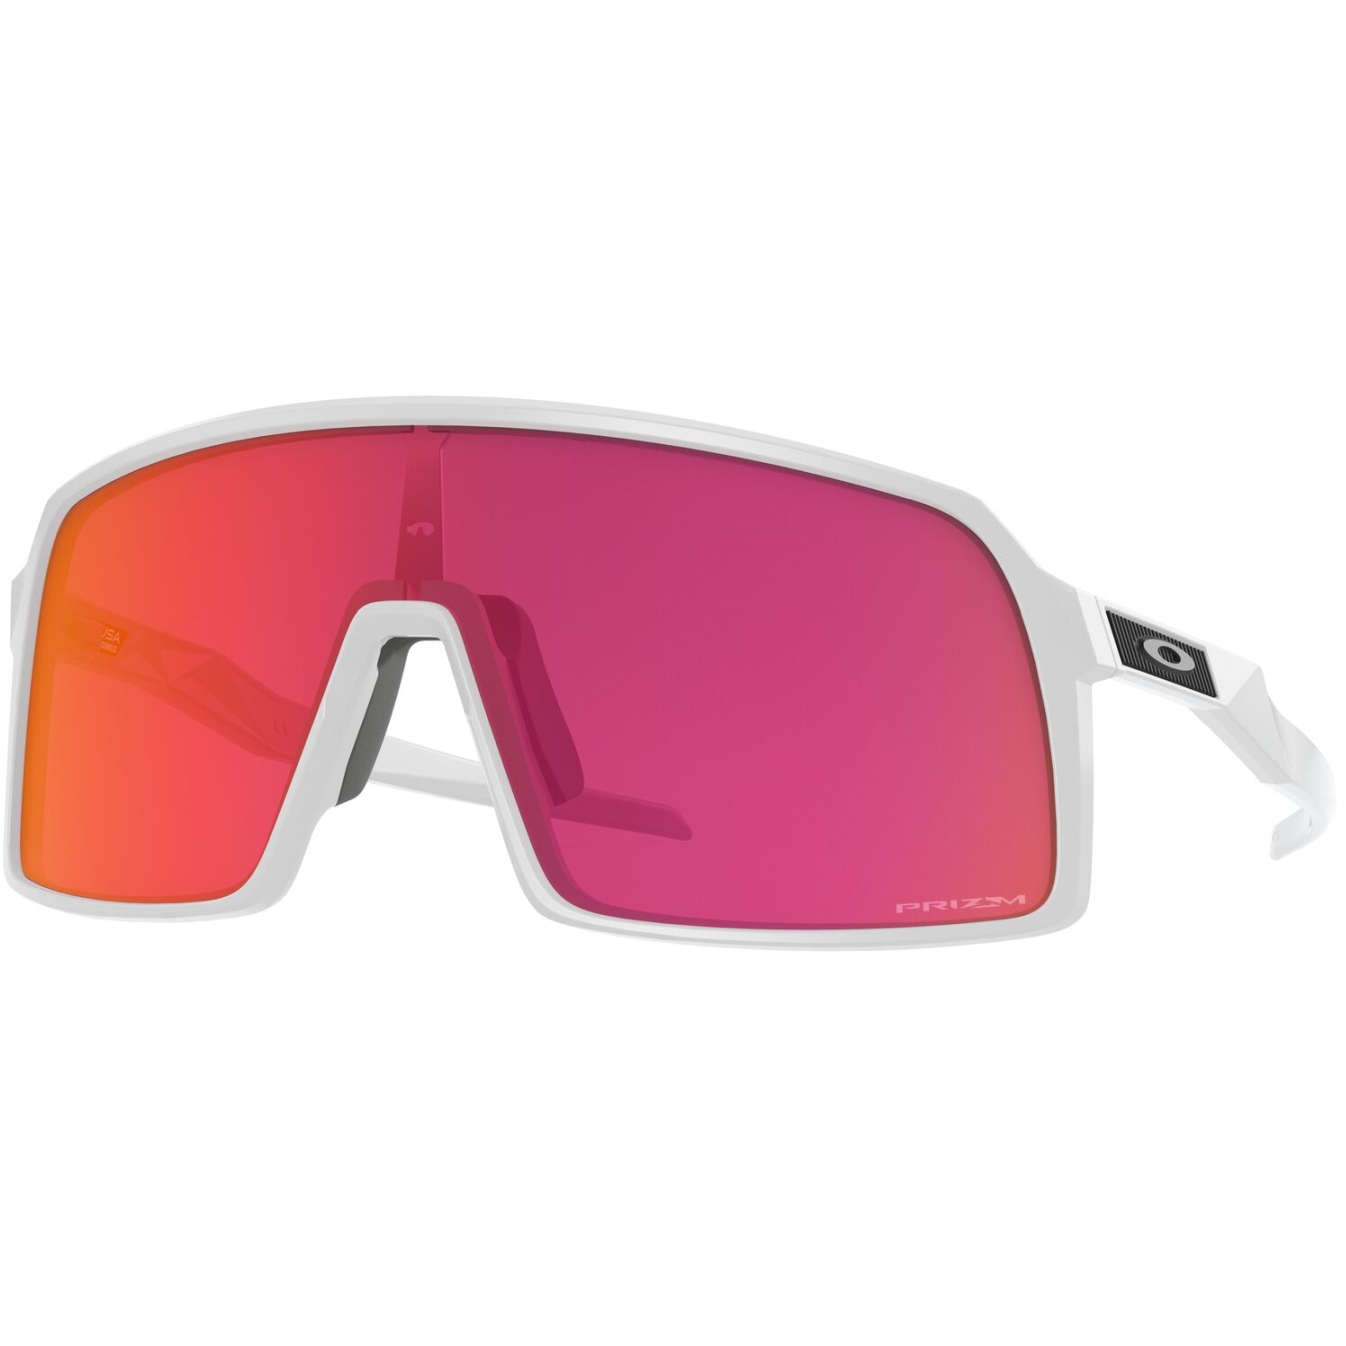 Picture of Oakley Sutro Glasses - Polished White/Prizm Field - OO9406-9137